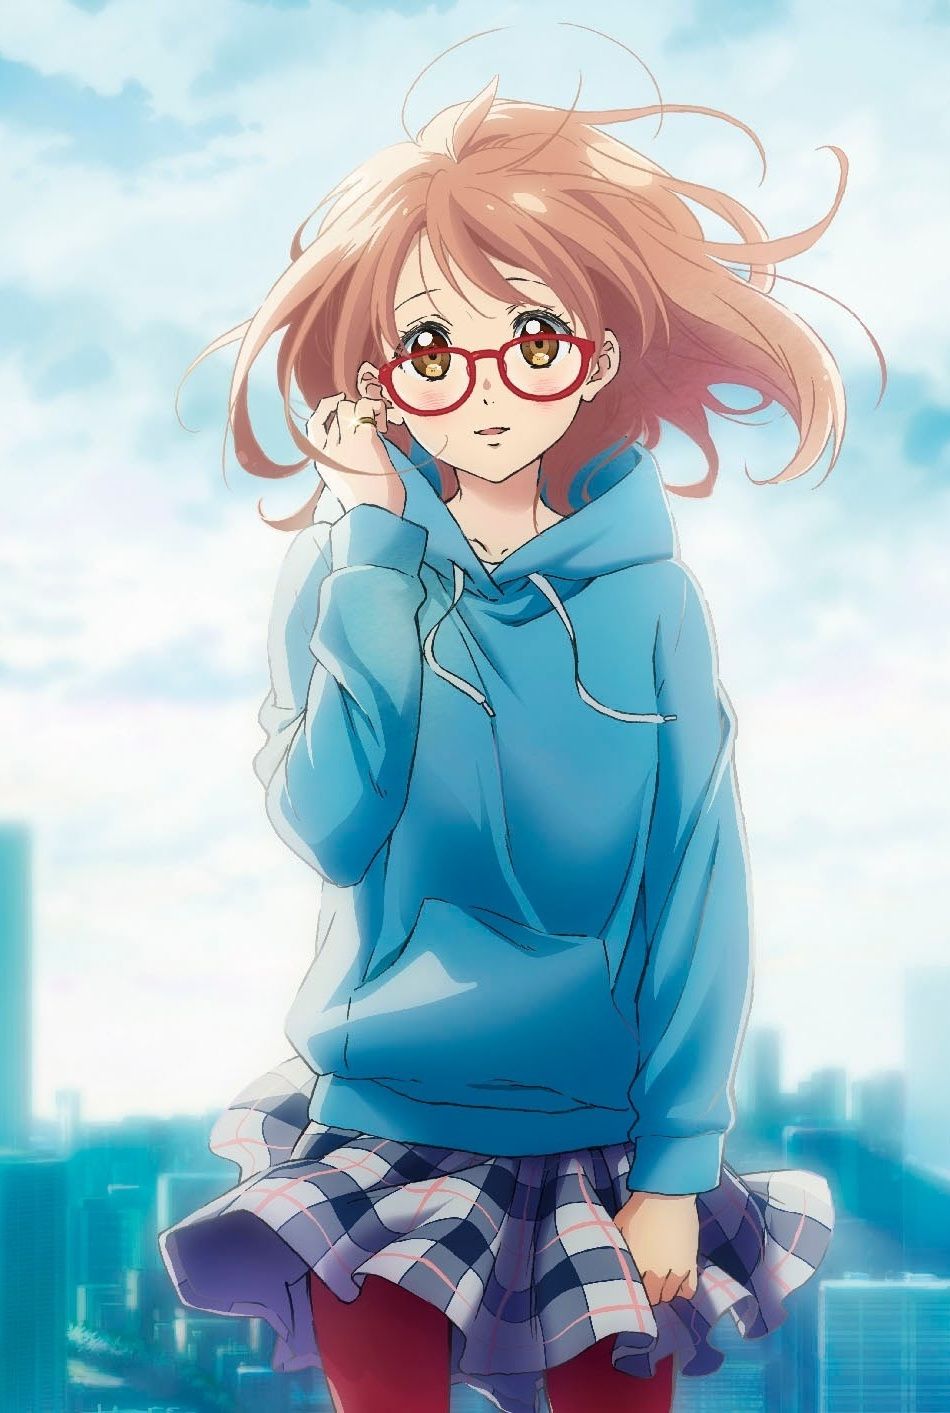 Cute Anime Gamer Girl with Glasses